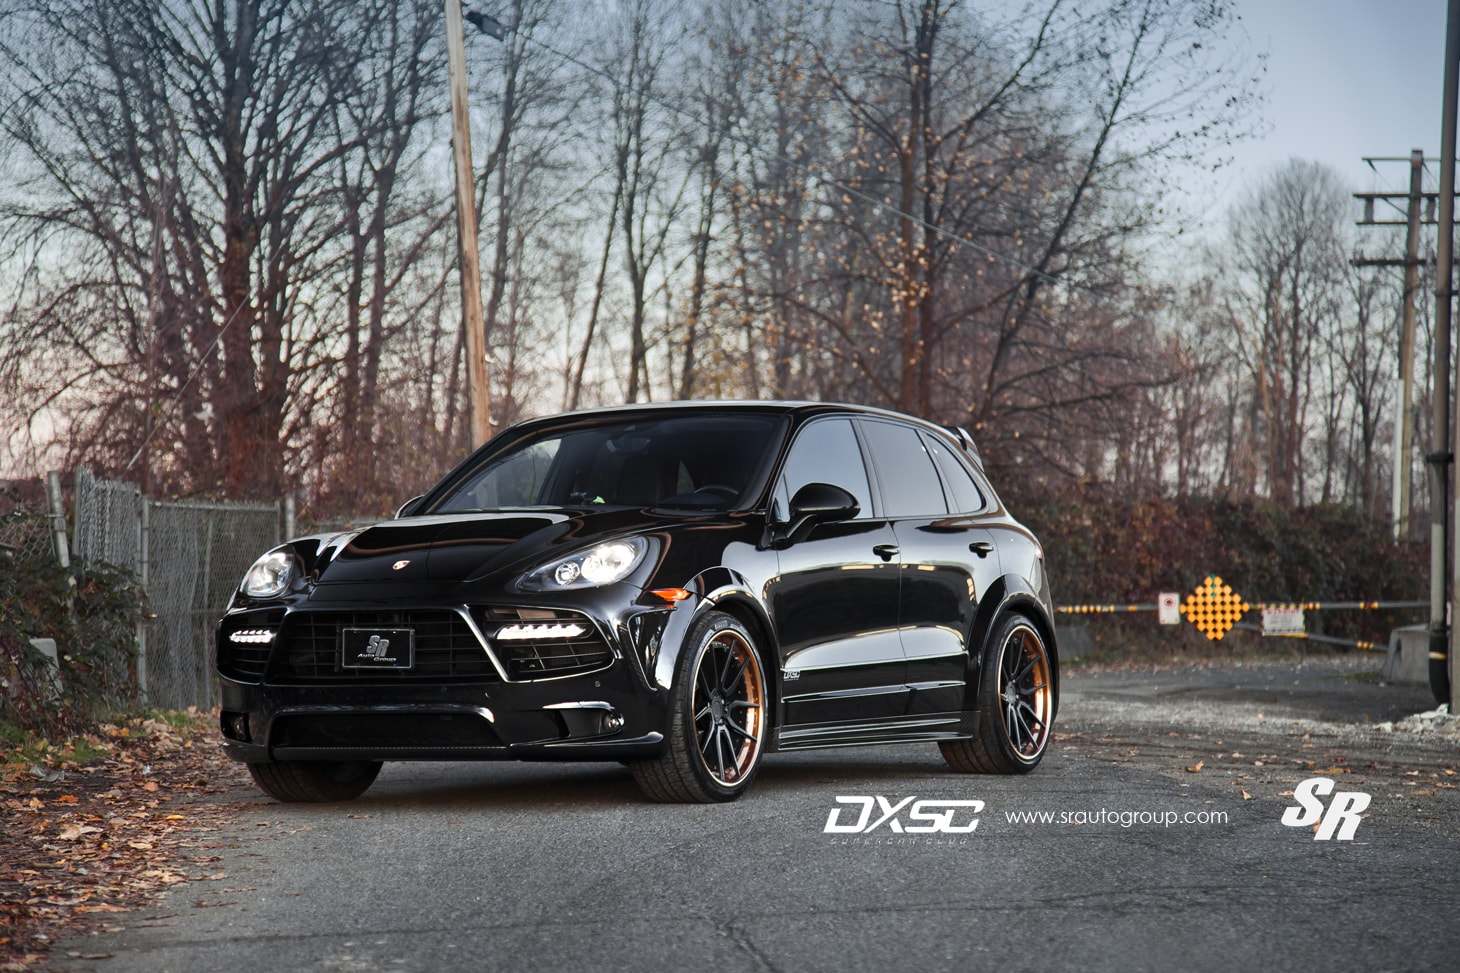 Porsche Cayenne Turbo S Receives Mansory and ADV.1 Goodies